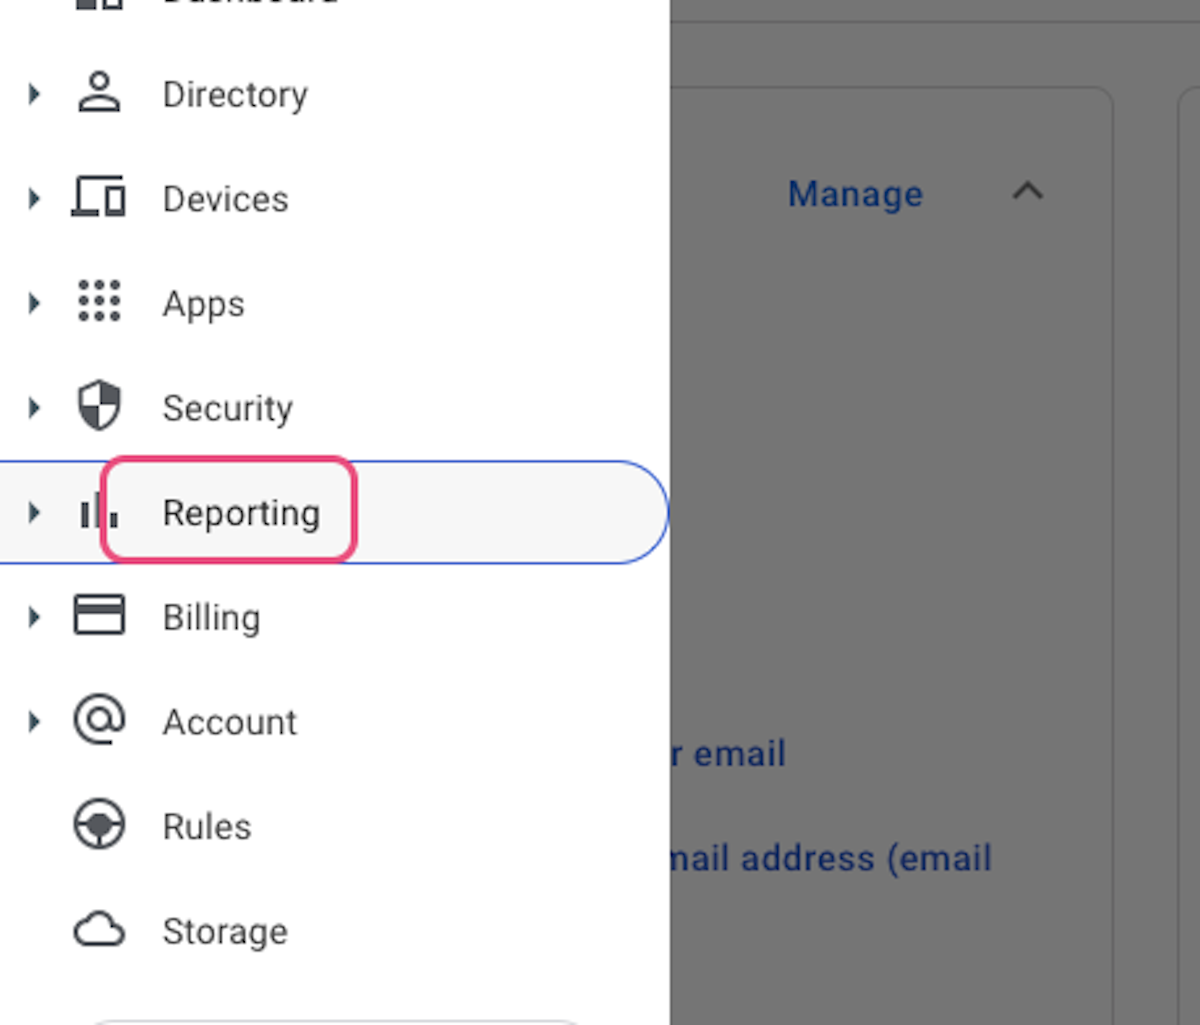 Click on Reporting